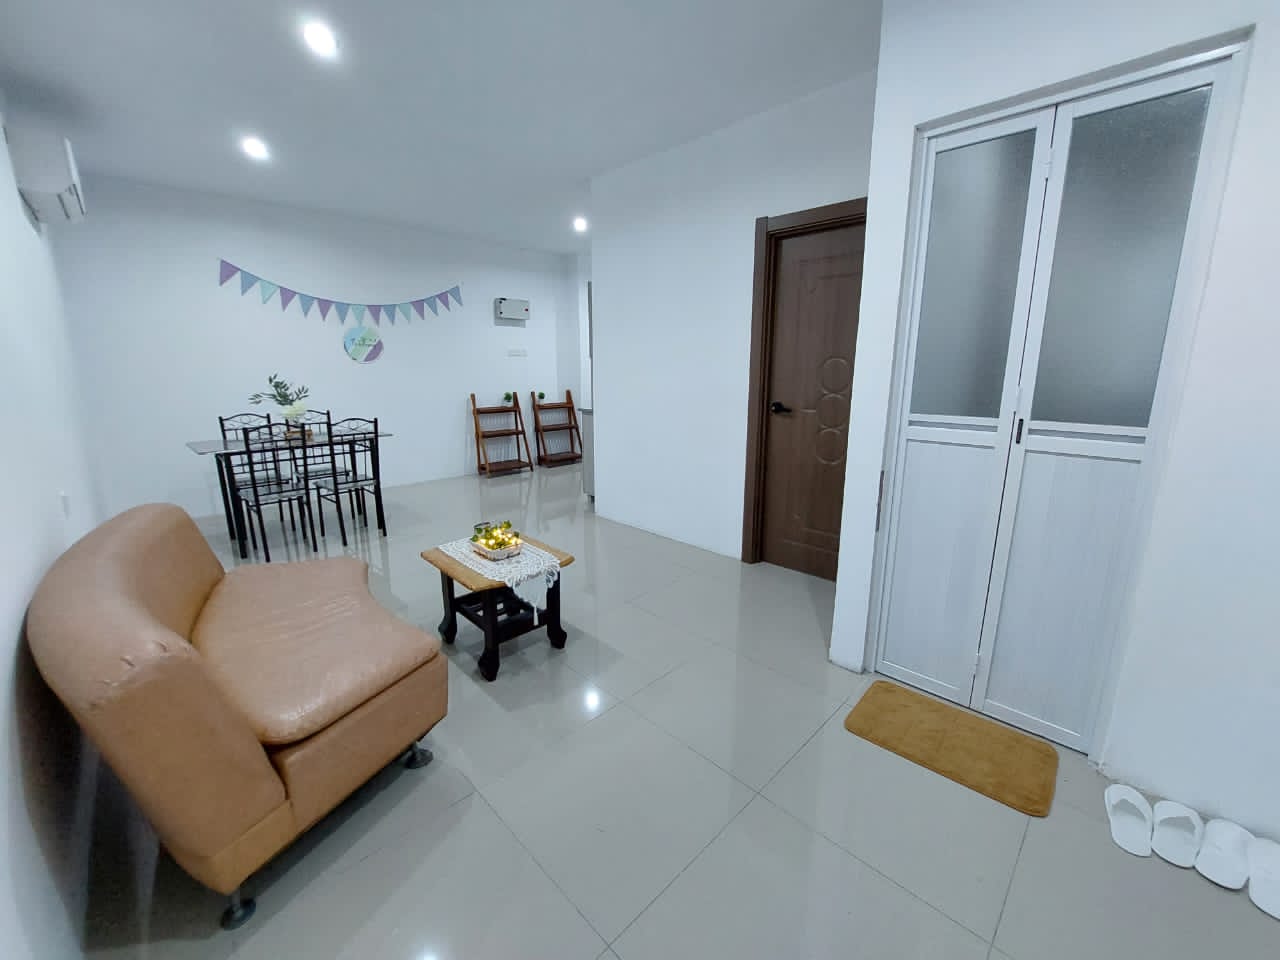 For Rent 2 Bed 2 Bath @ Satria Residence